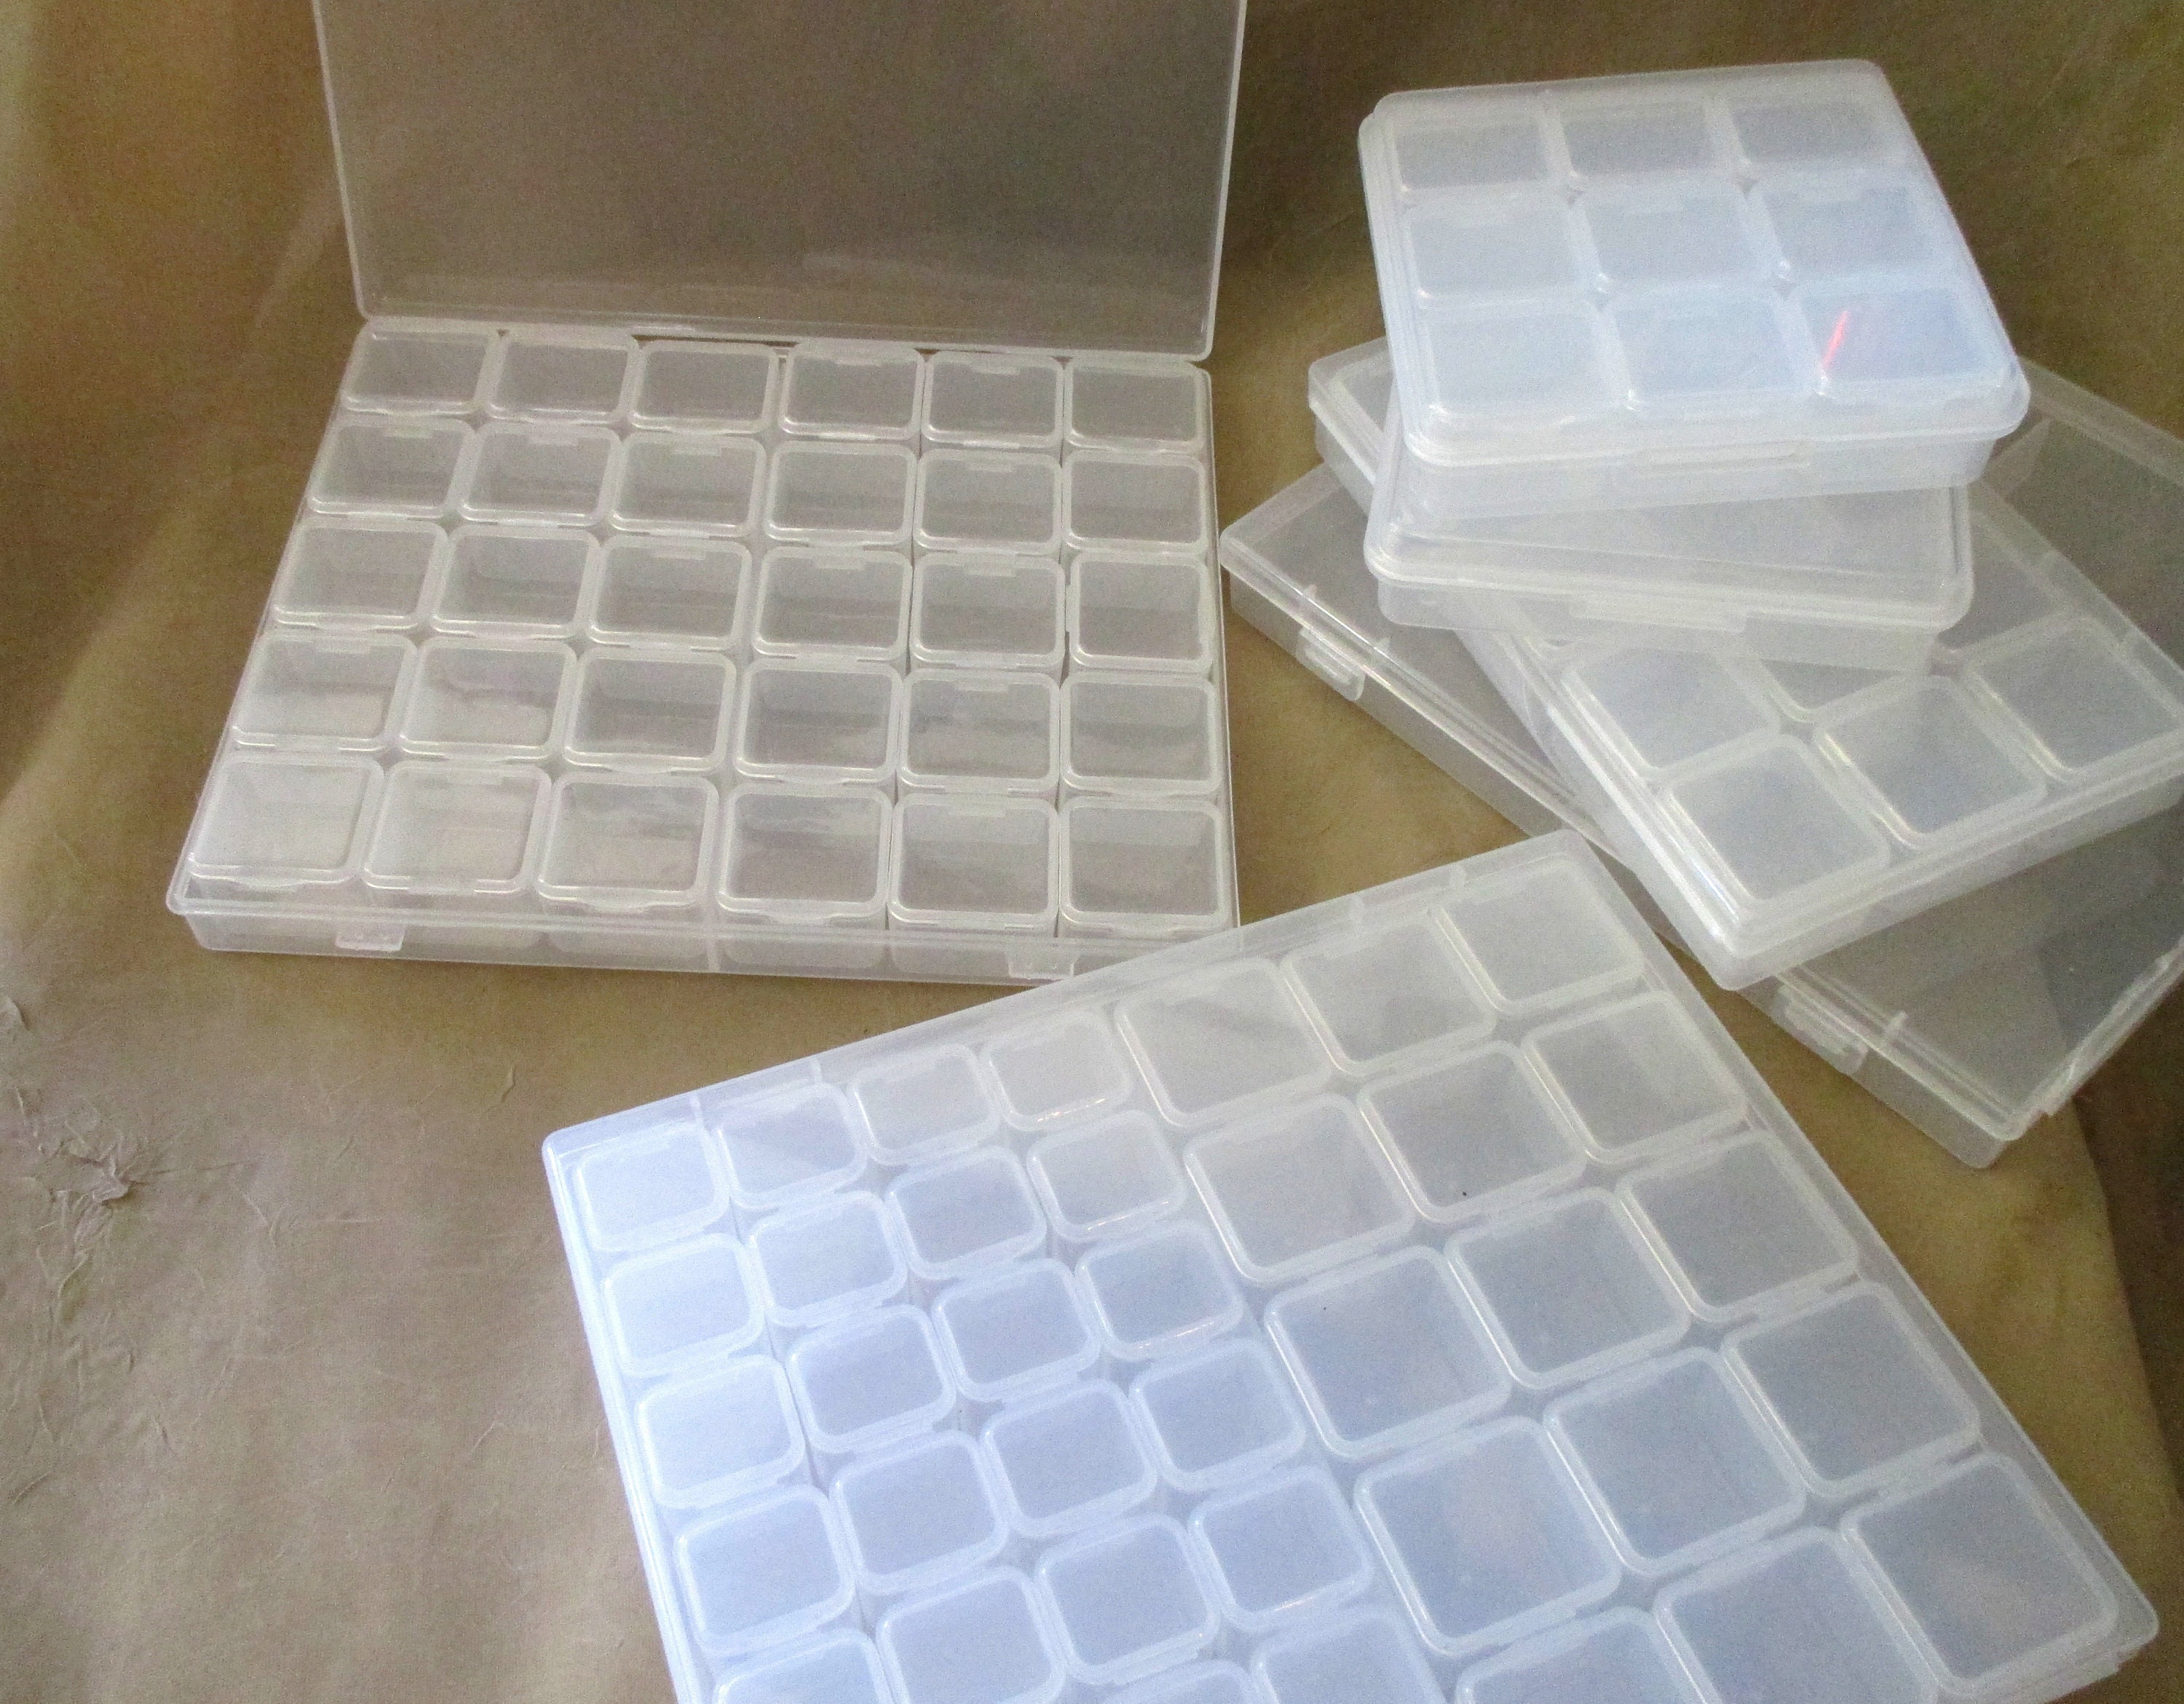 Seed Bead Storage Box, Storage Containers 56 Grids, Plastic